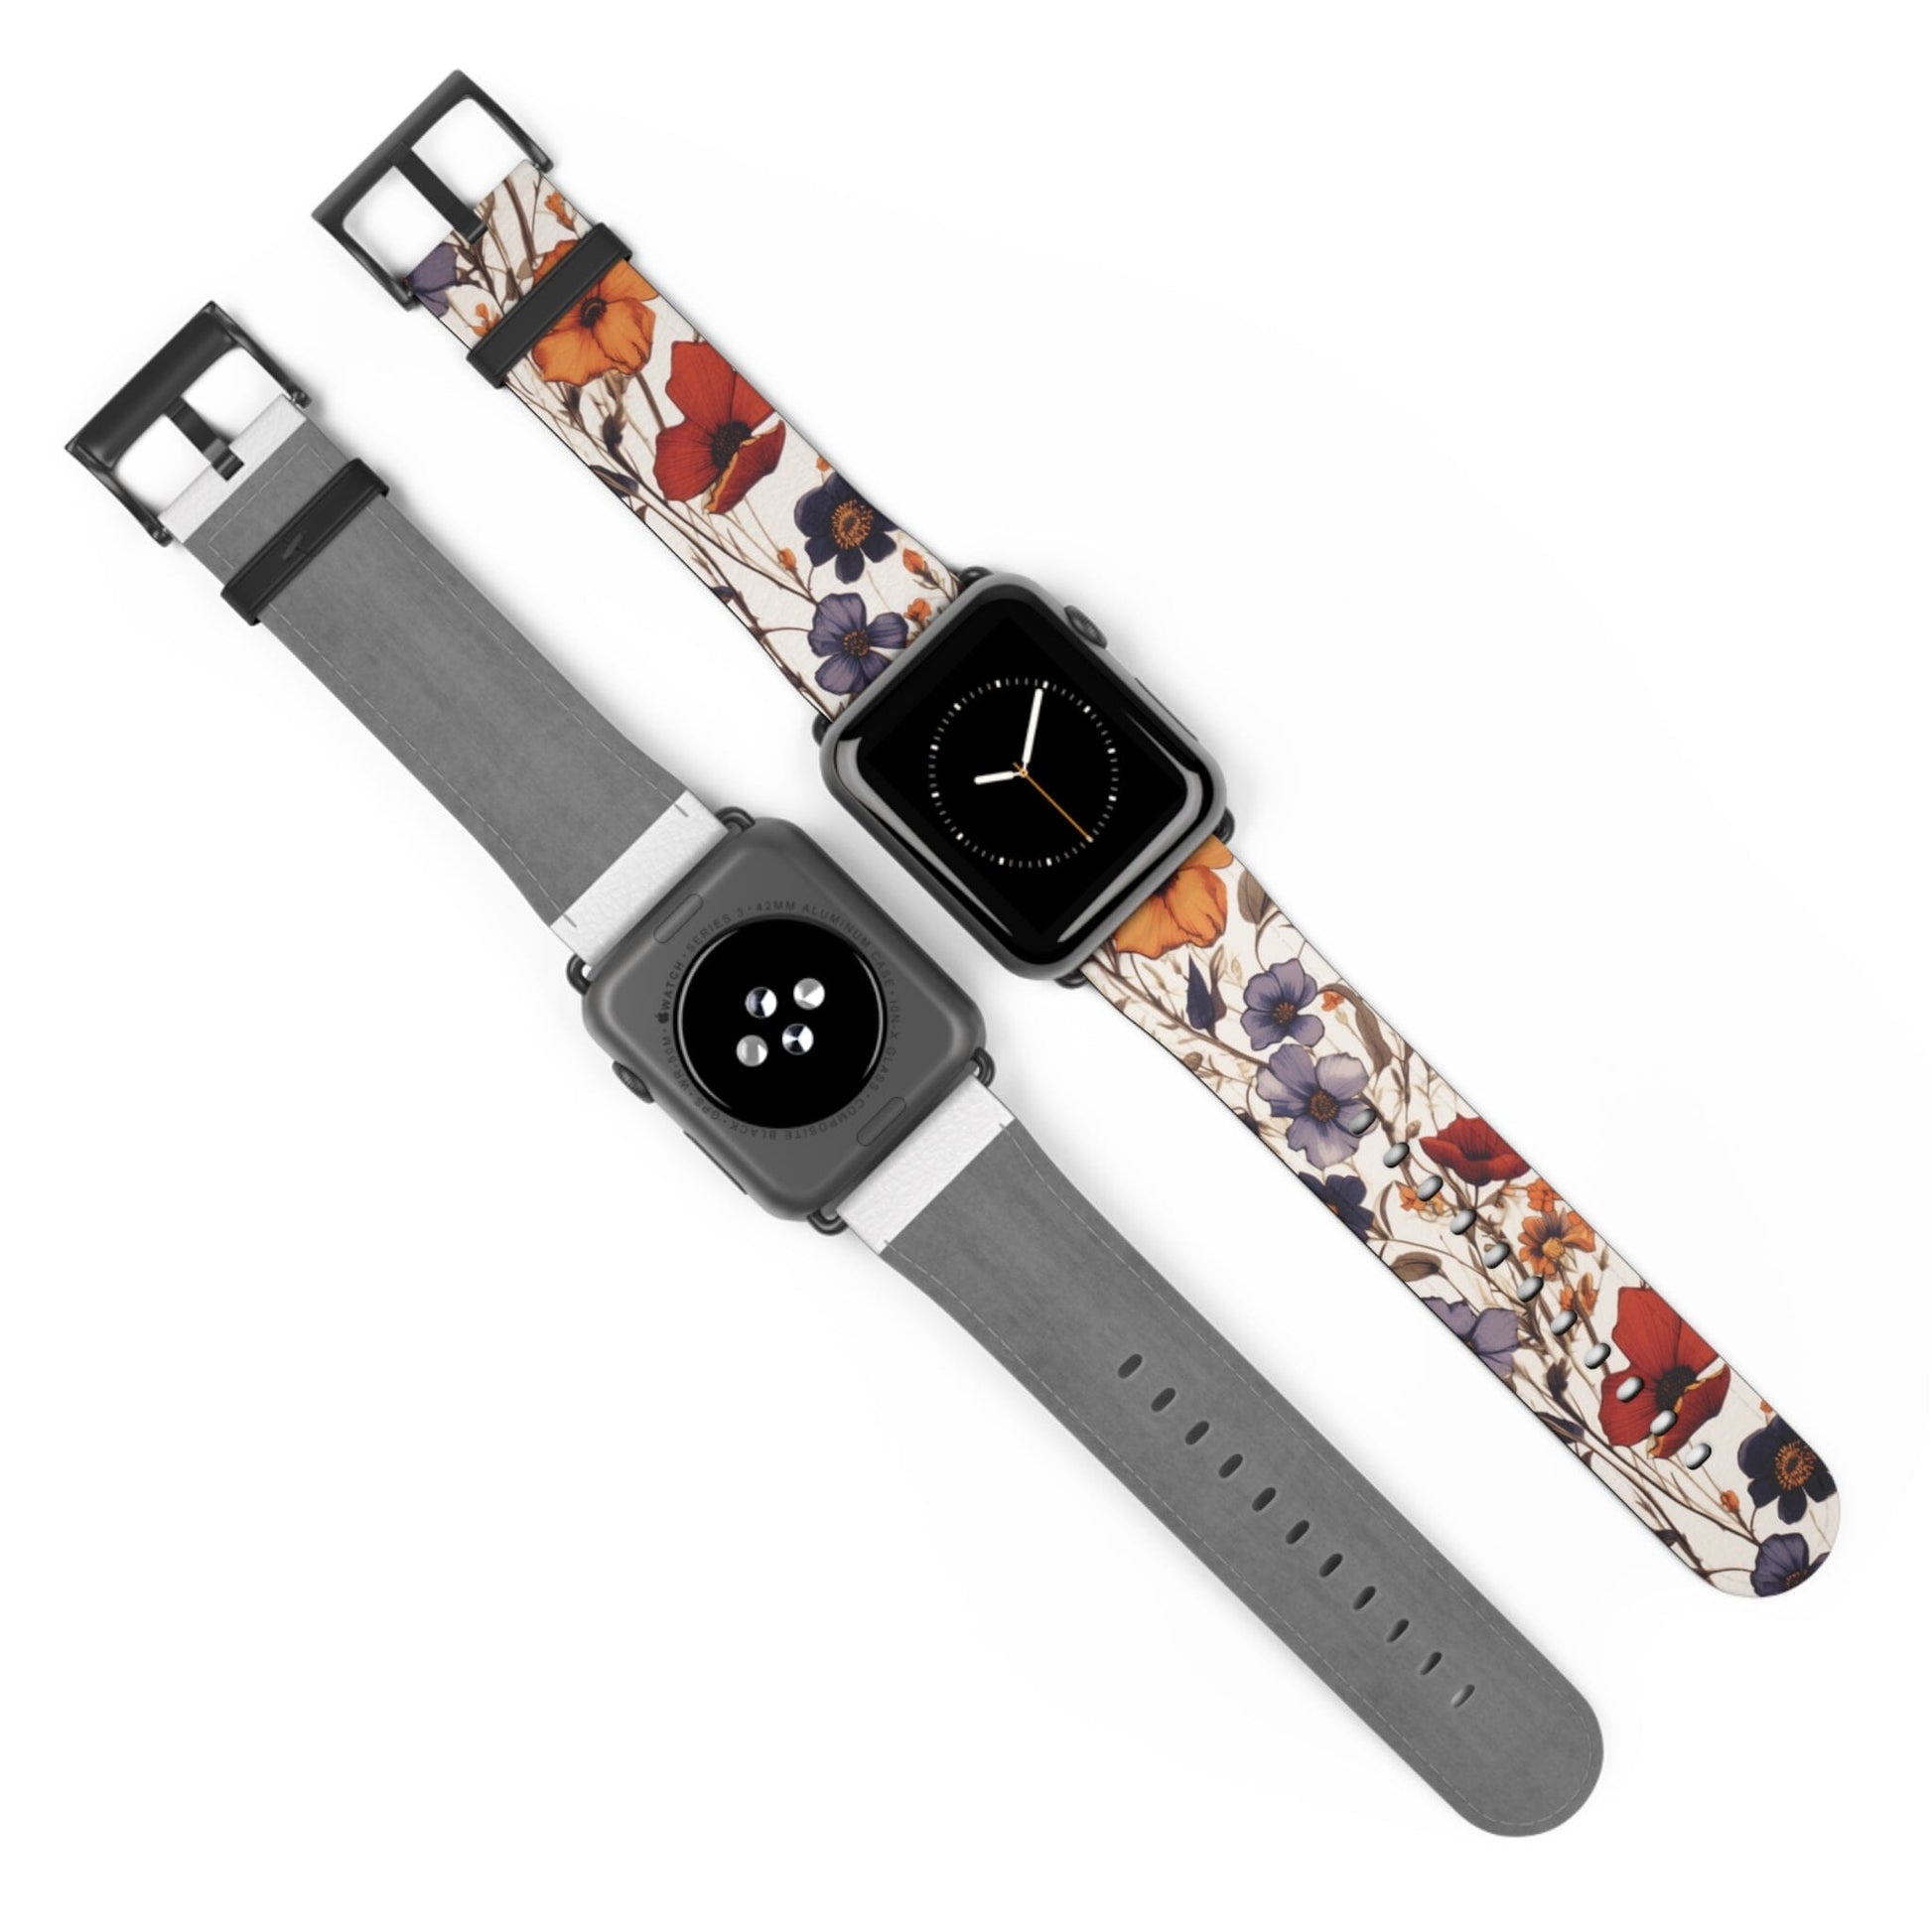 Wildflowers | Apple Watch Band Accessories